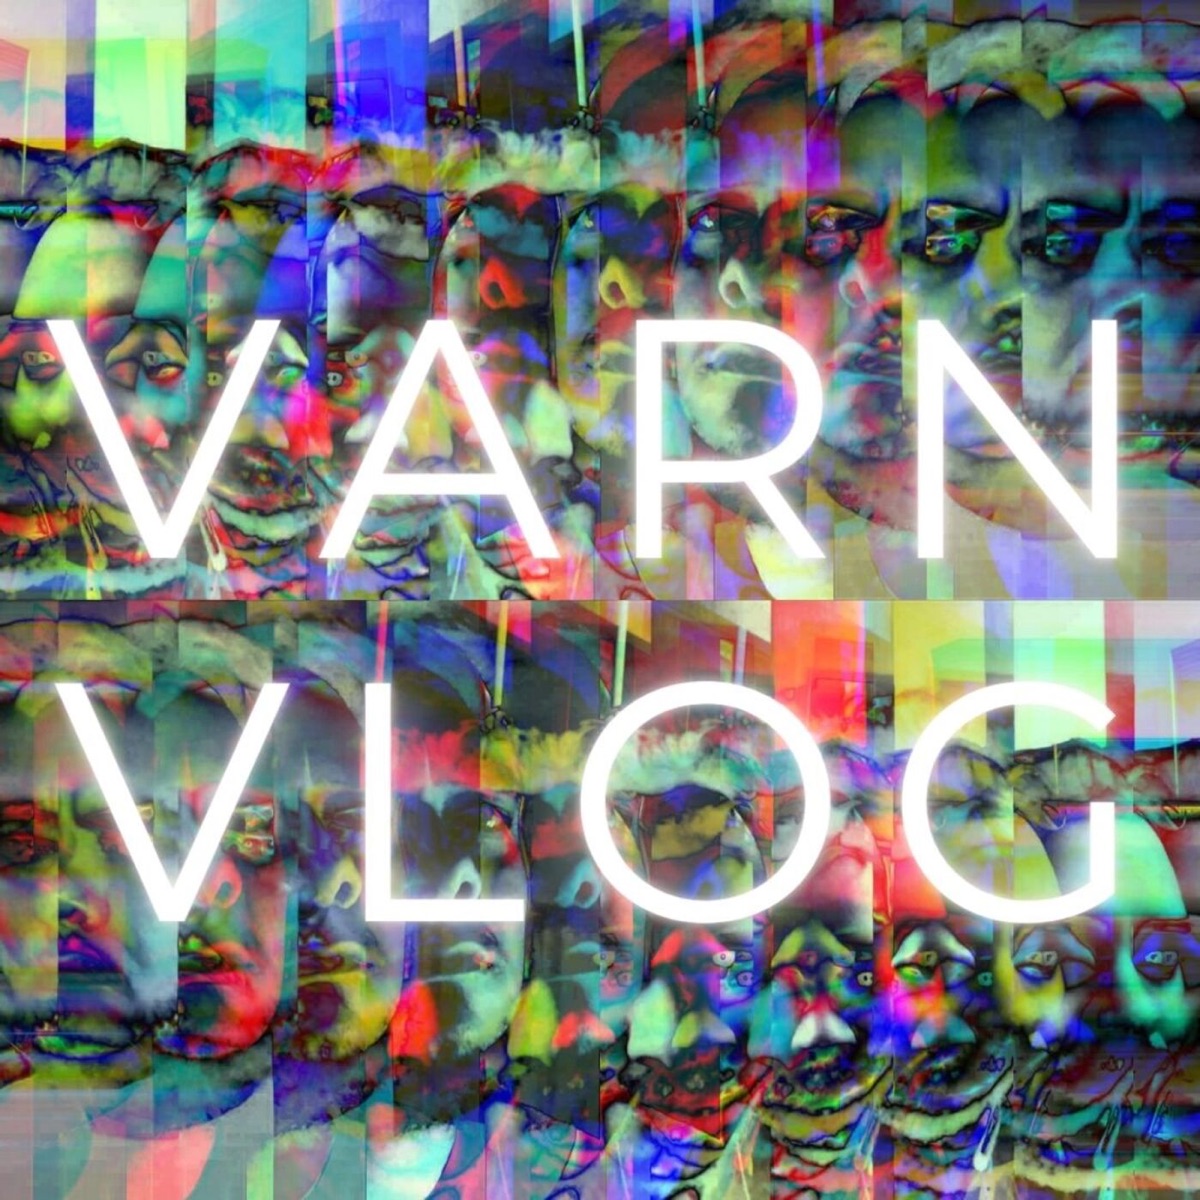 Interview with Varn Vlog on the (forgotten) theoretical output of the Second International